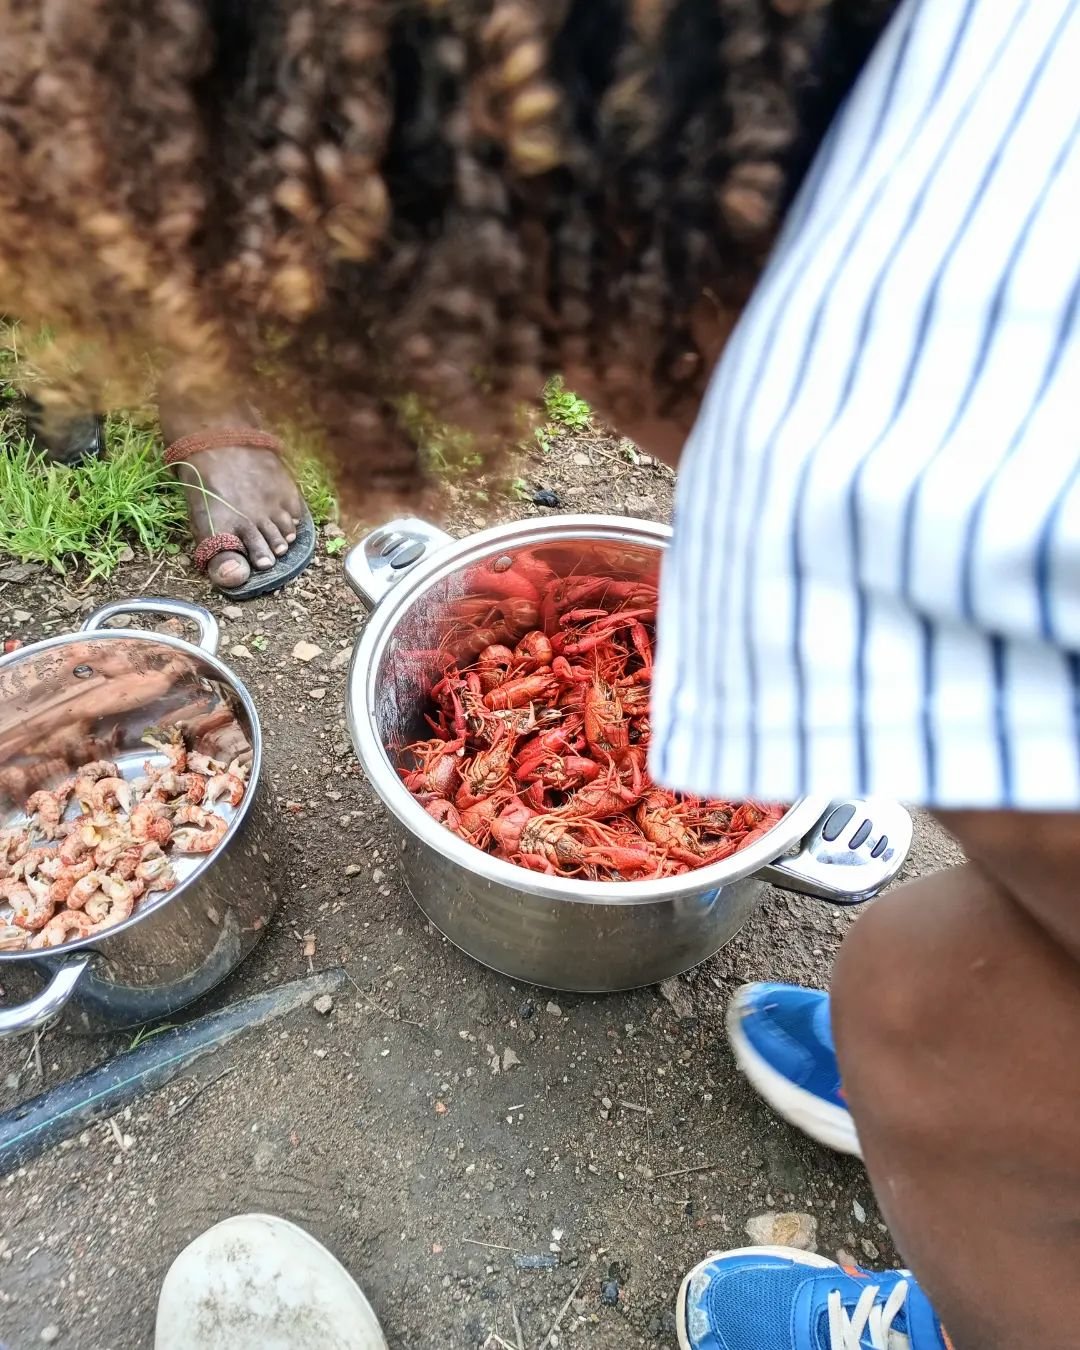 Remember to order for Crayfish at Le Gite Farm House.. 

Crayfish is a fresh water crustaceans closely related to lobster that is found in oceans.
It has just been discovered in one of our lakes in Rubirizi ( L. Nkugute)..

For those who love crayfis